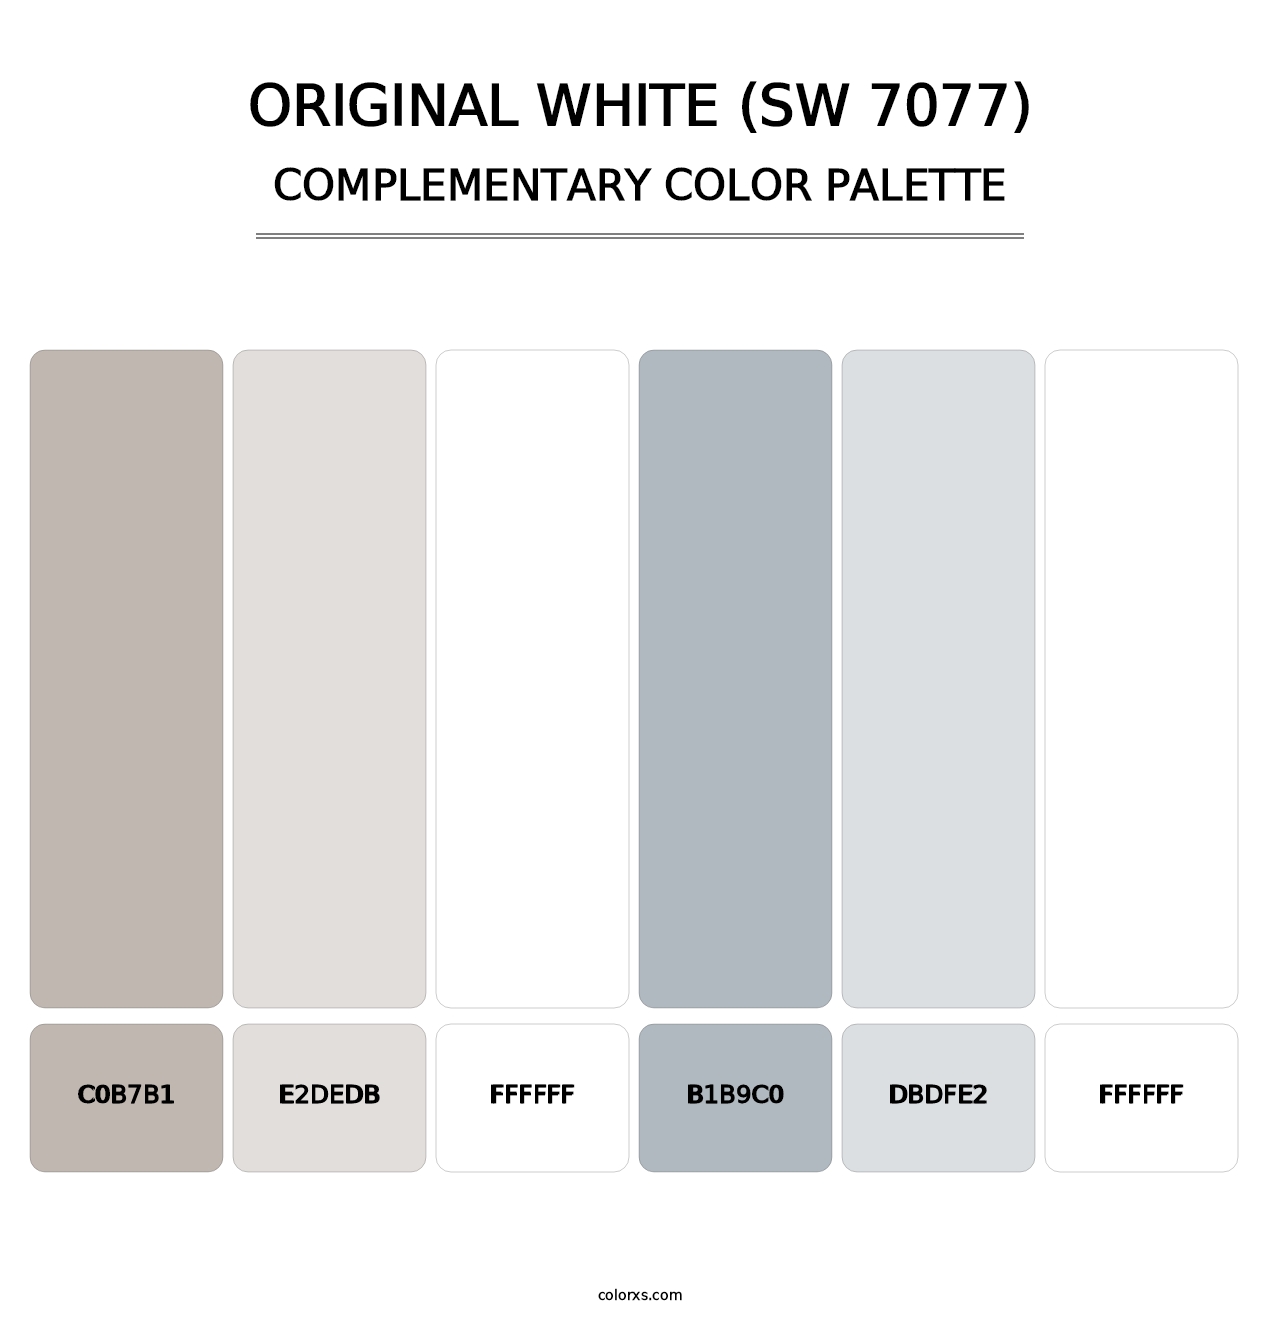 Original White (SW 7077) - Complementary Color Palette